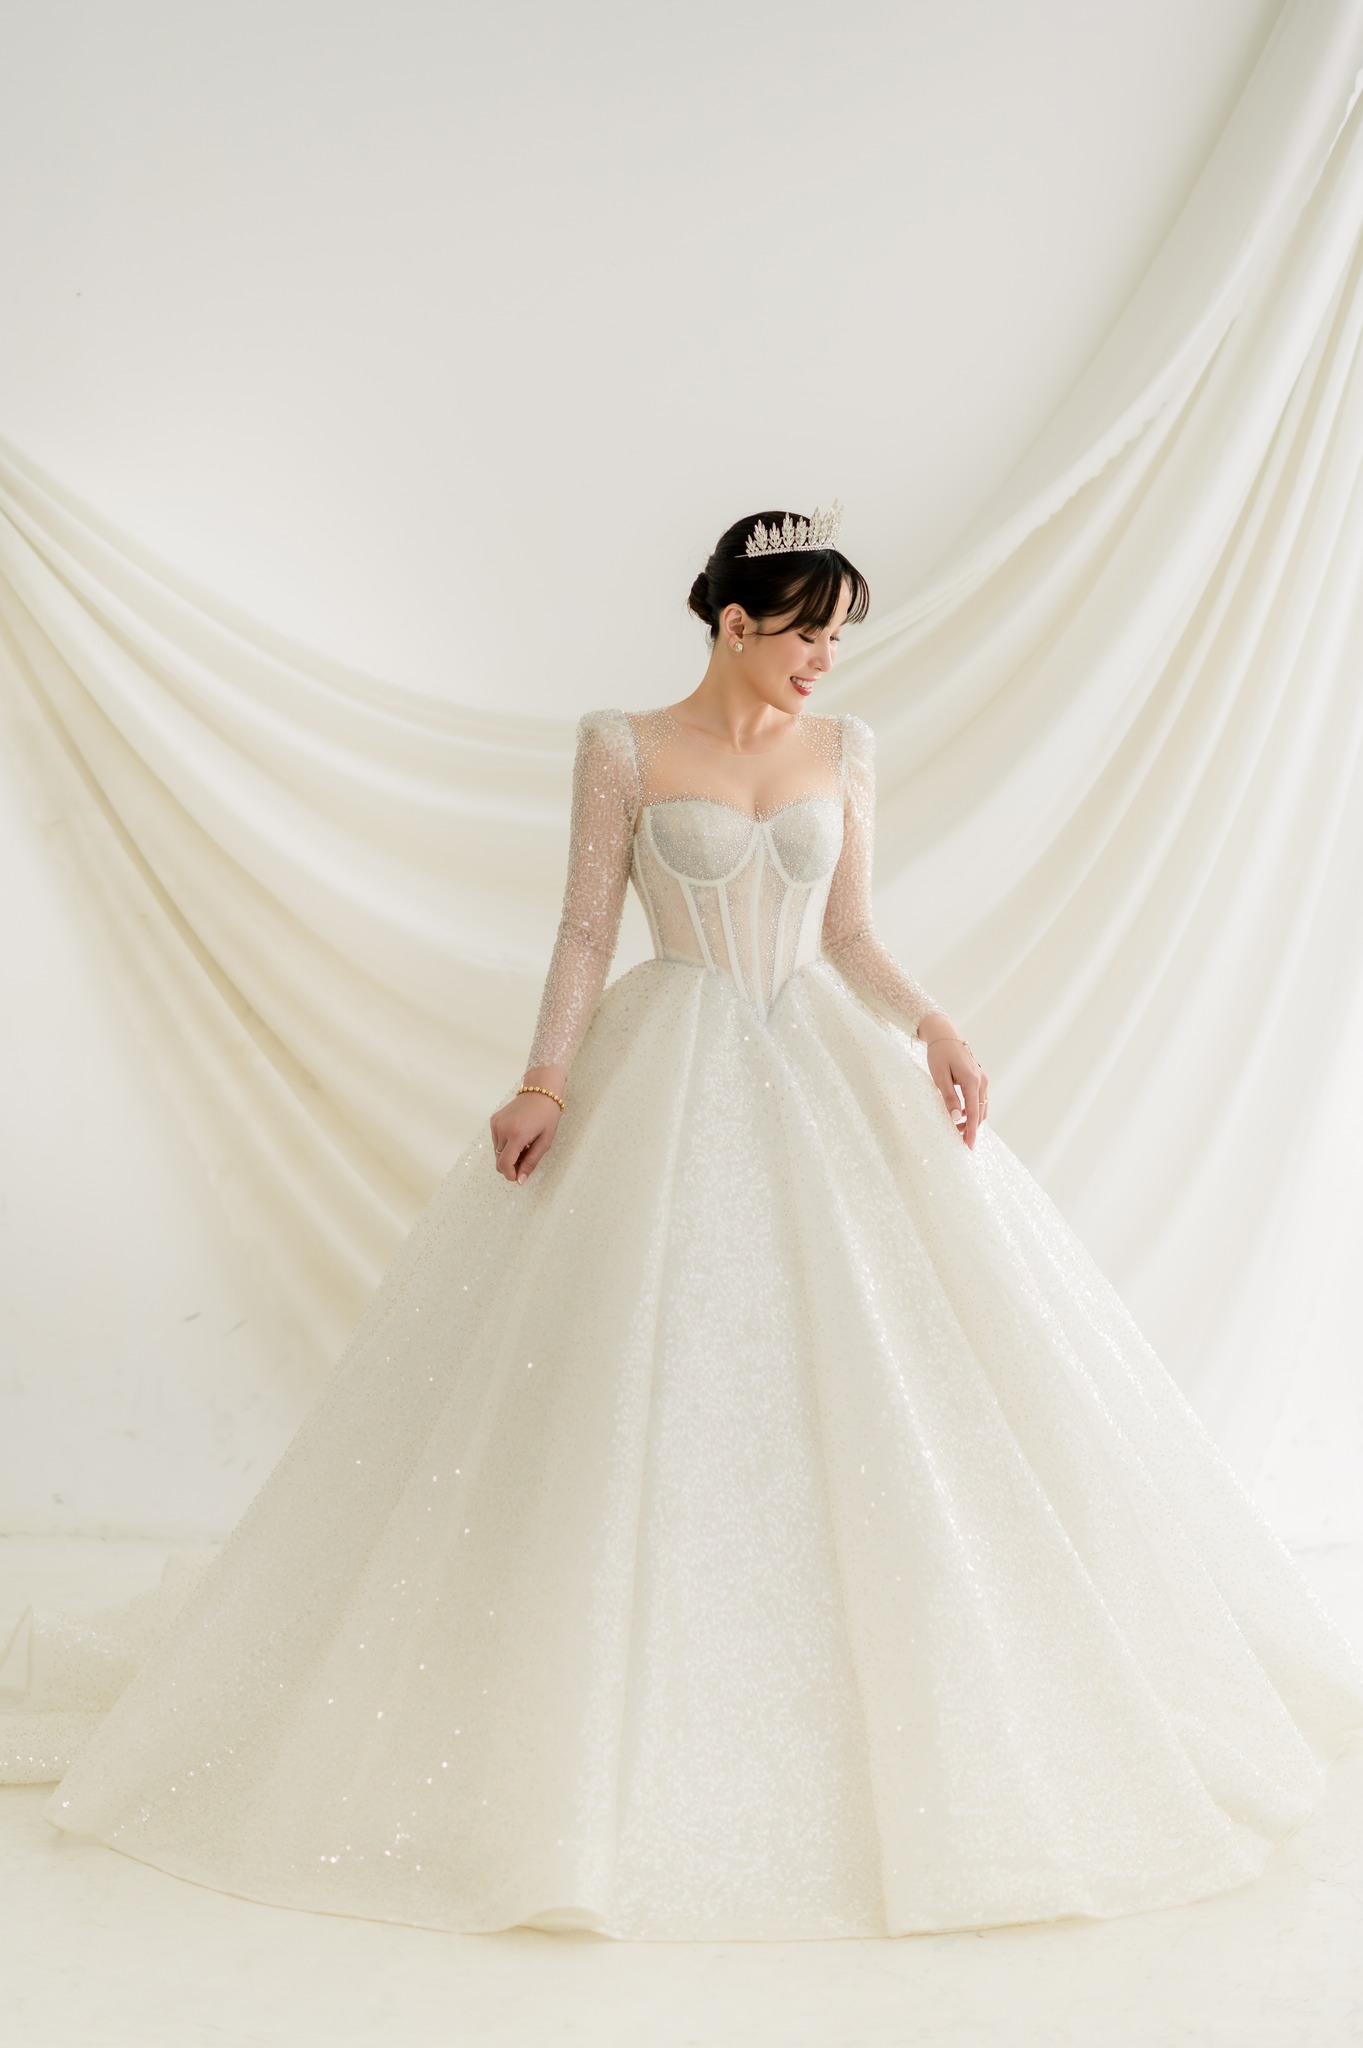 Maktumang Glamorous Princess Wedding Gown With Pearls, Beaded Lace, 3D  Floral Appliques, And East Princess Bridal Style From Xzy1984316, $235.18 |  DHgate.Com